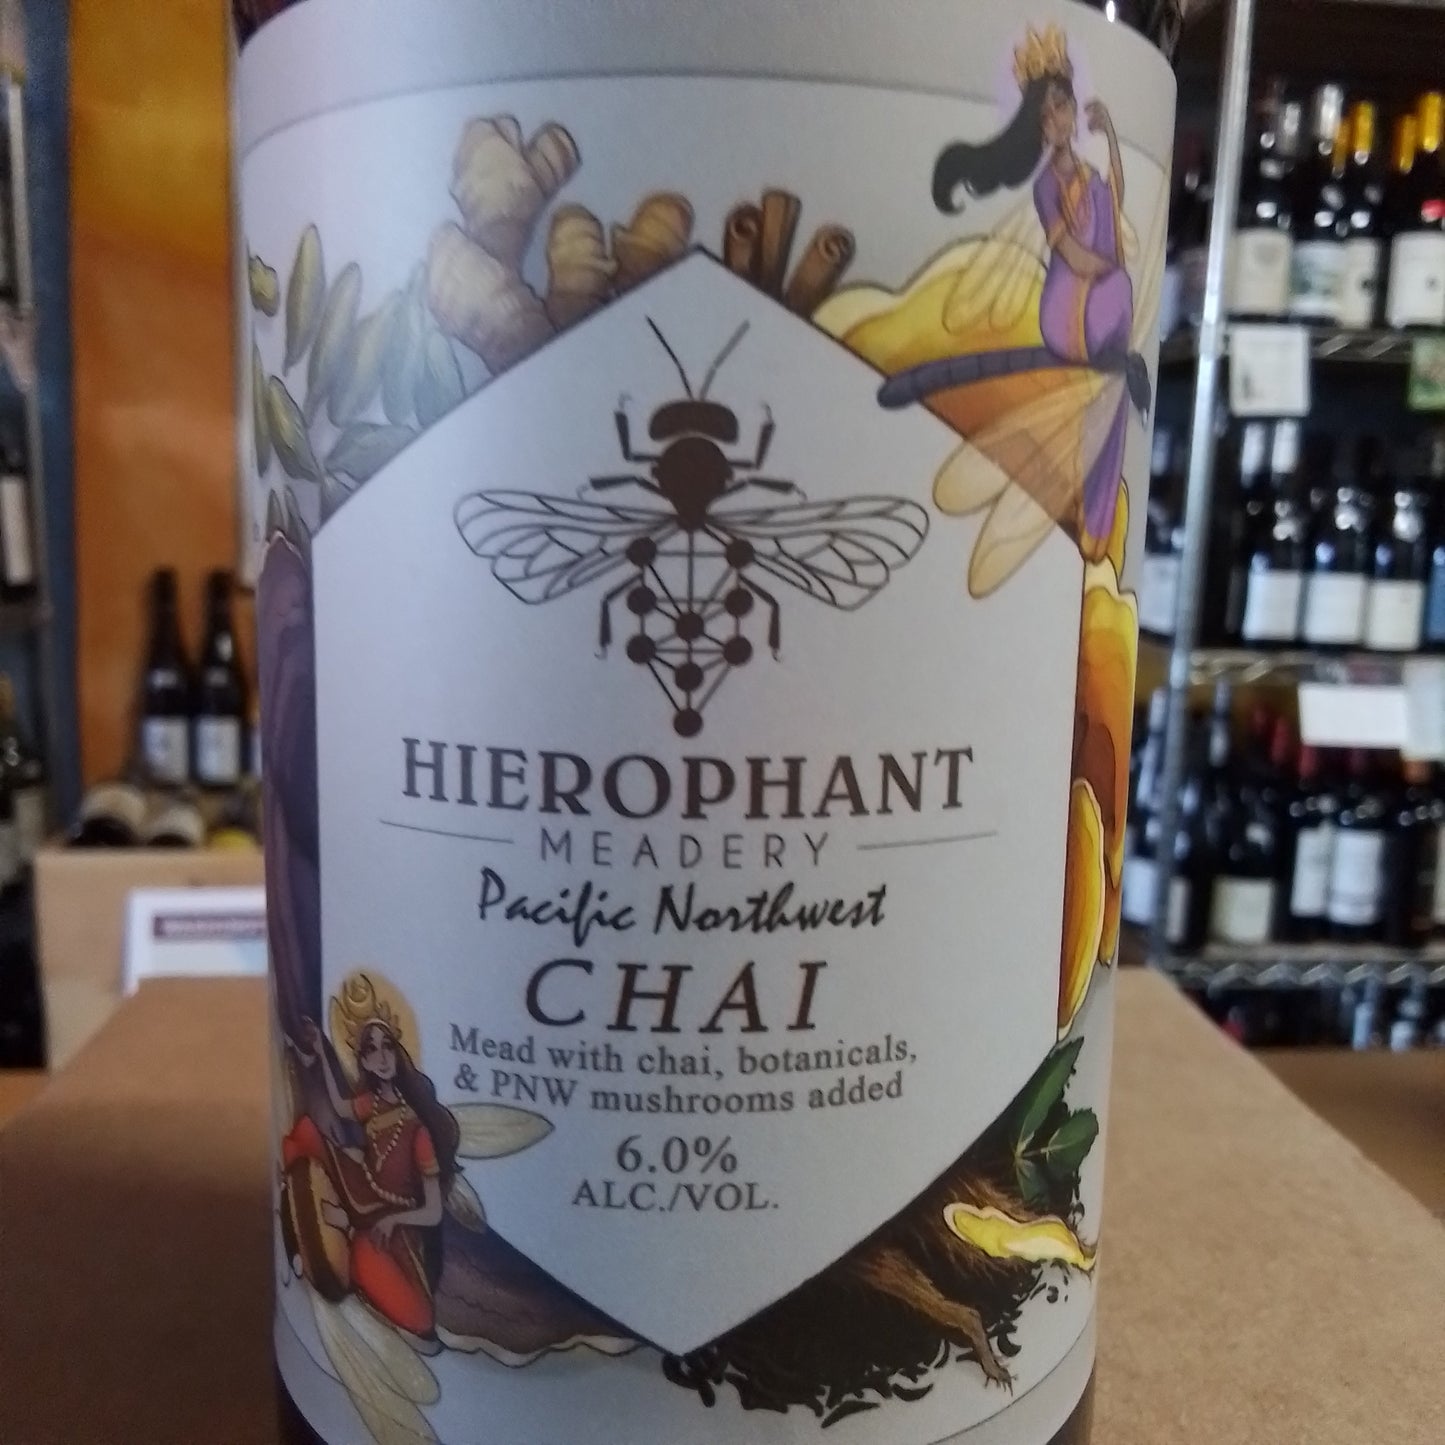 HIEROPHANT MEADERY Pacific Northwest Chai Mead (Freeland, WA)